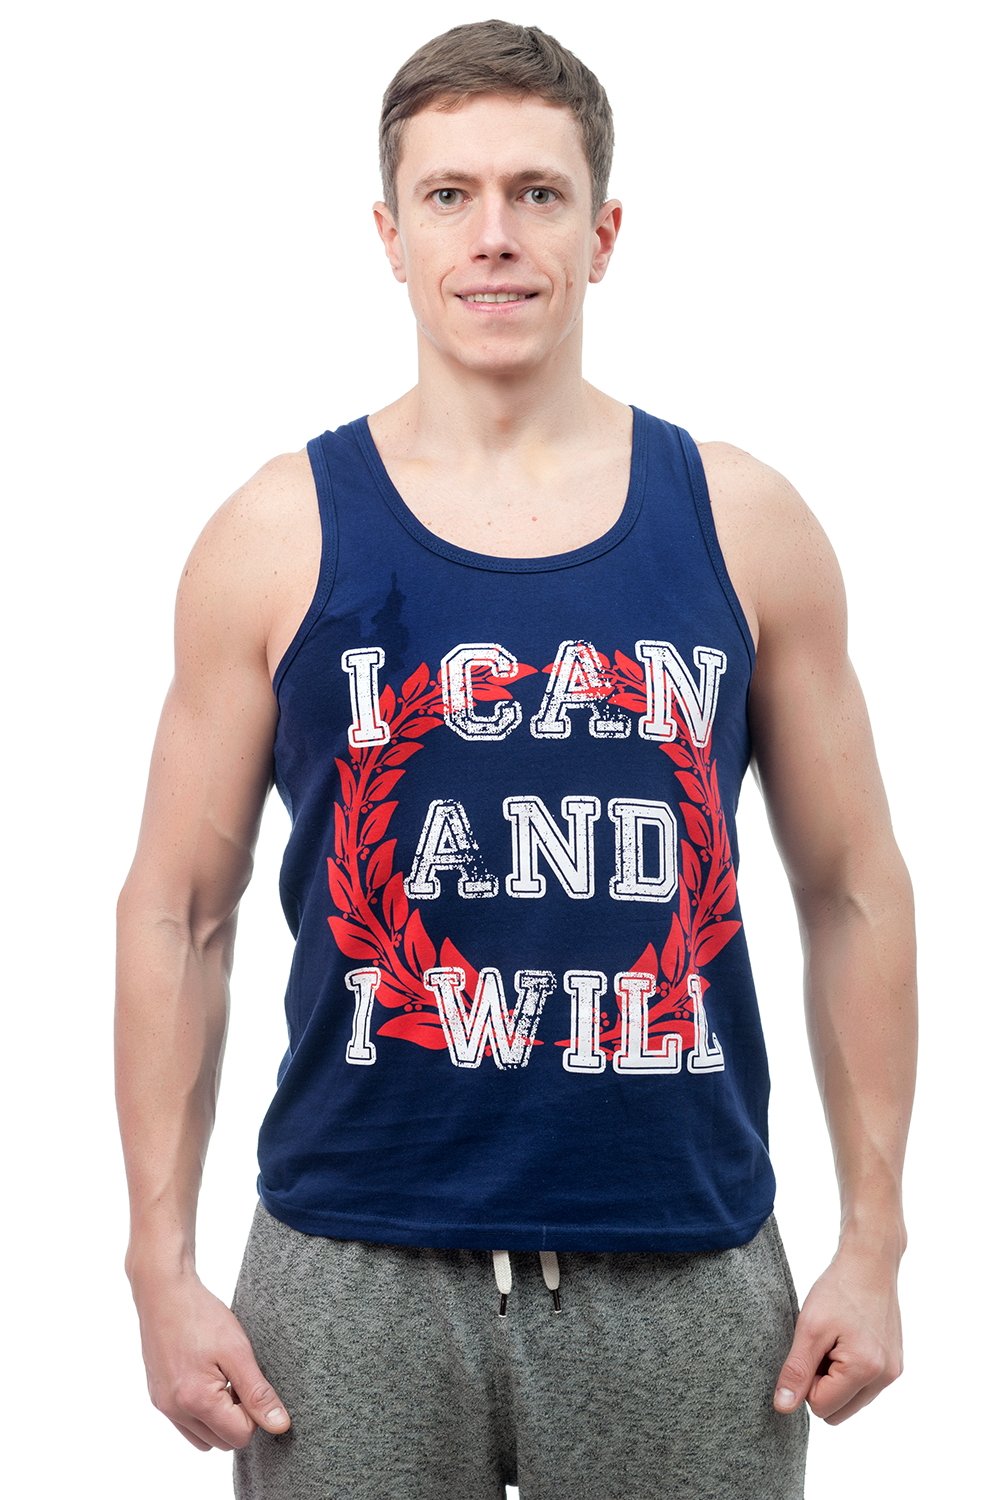 Men`s t-shirt I can and i will, dark blue, wreath, size M